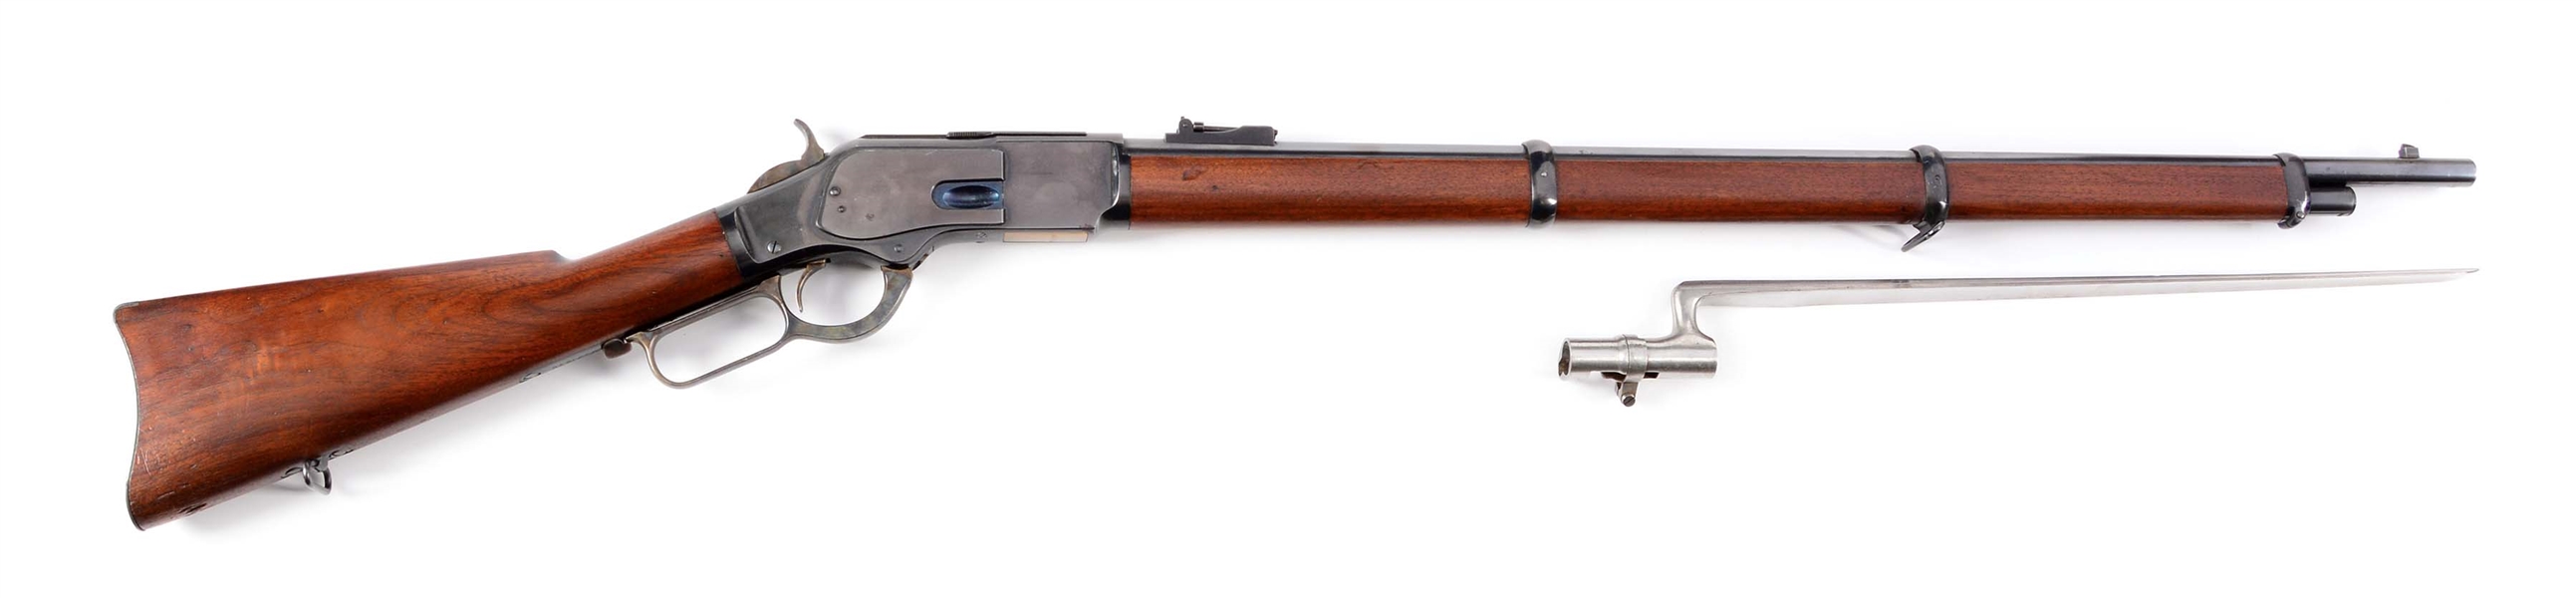 (C) PRIME WINCHESTER 3RD MODEL 1873 MUSKET WITH SOCKET BAYONET (1903).